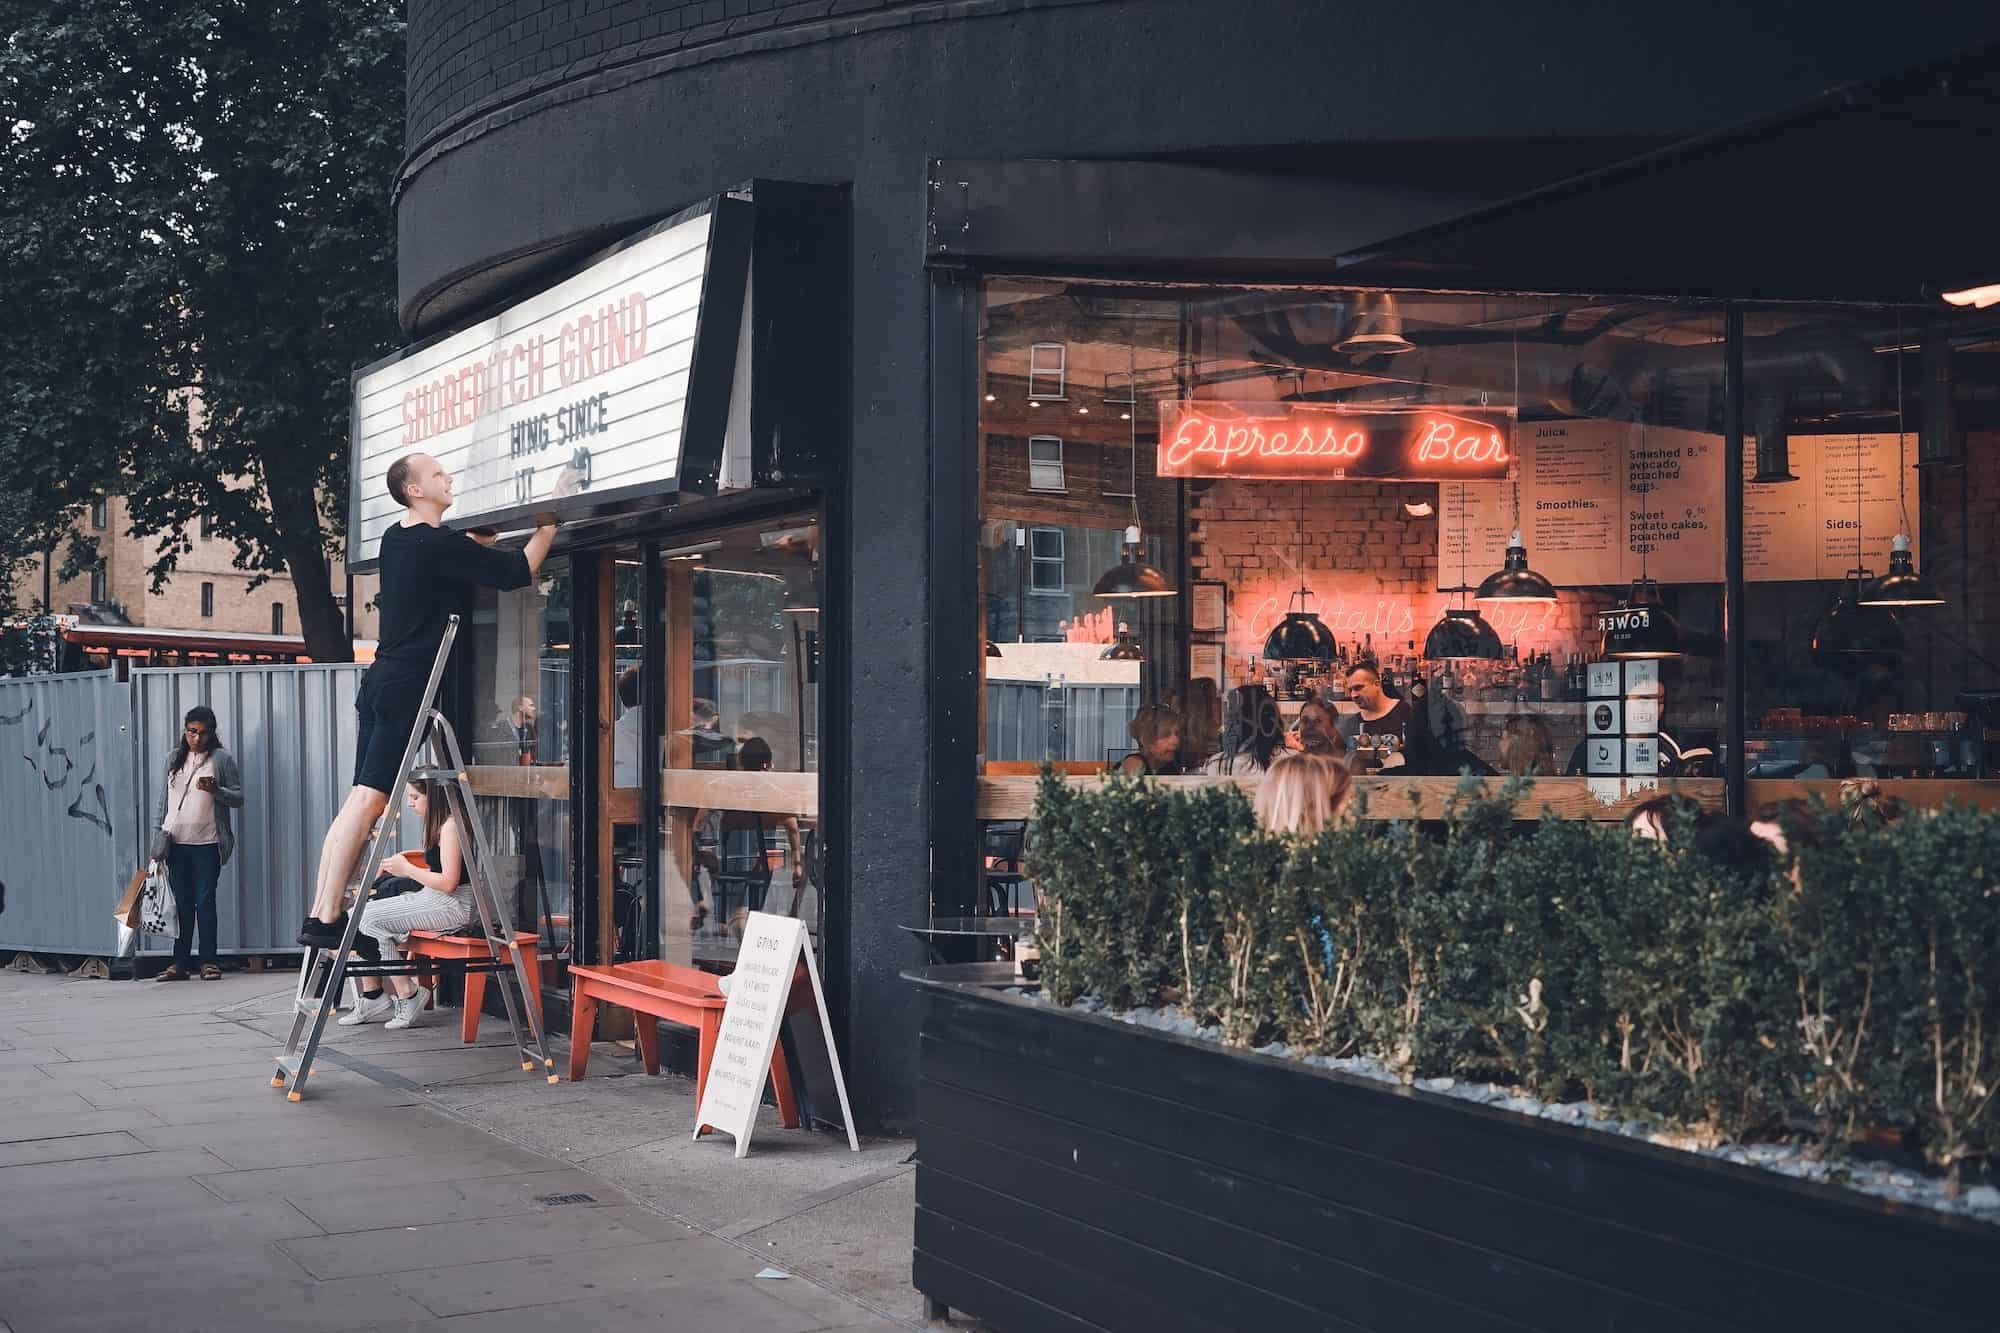 Kingdom of cool, Shoreditch is the place to go to see and be seen in its trendy restaurants like the Shoreditch Grind.